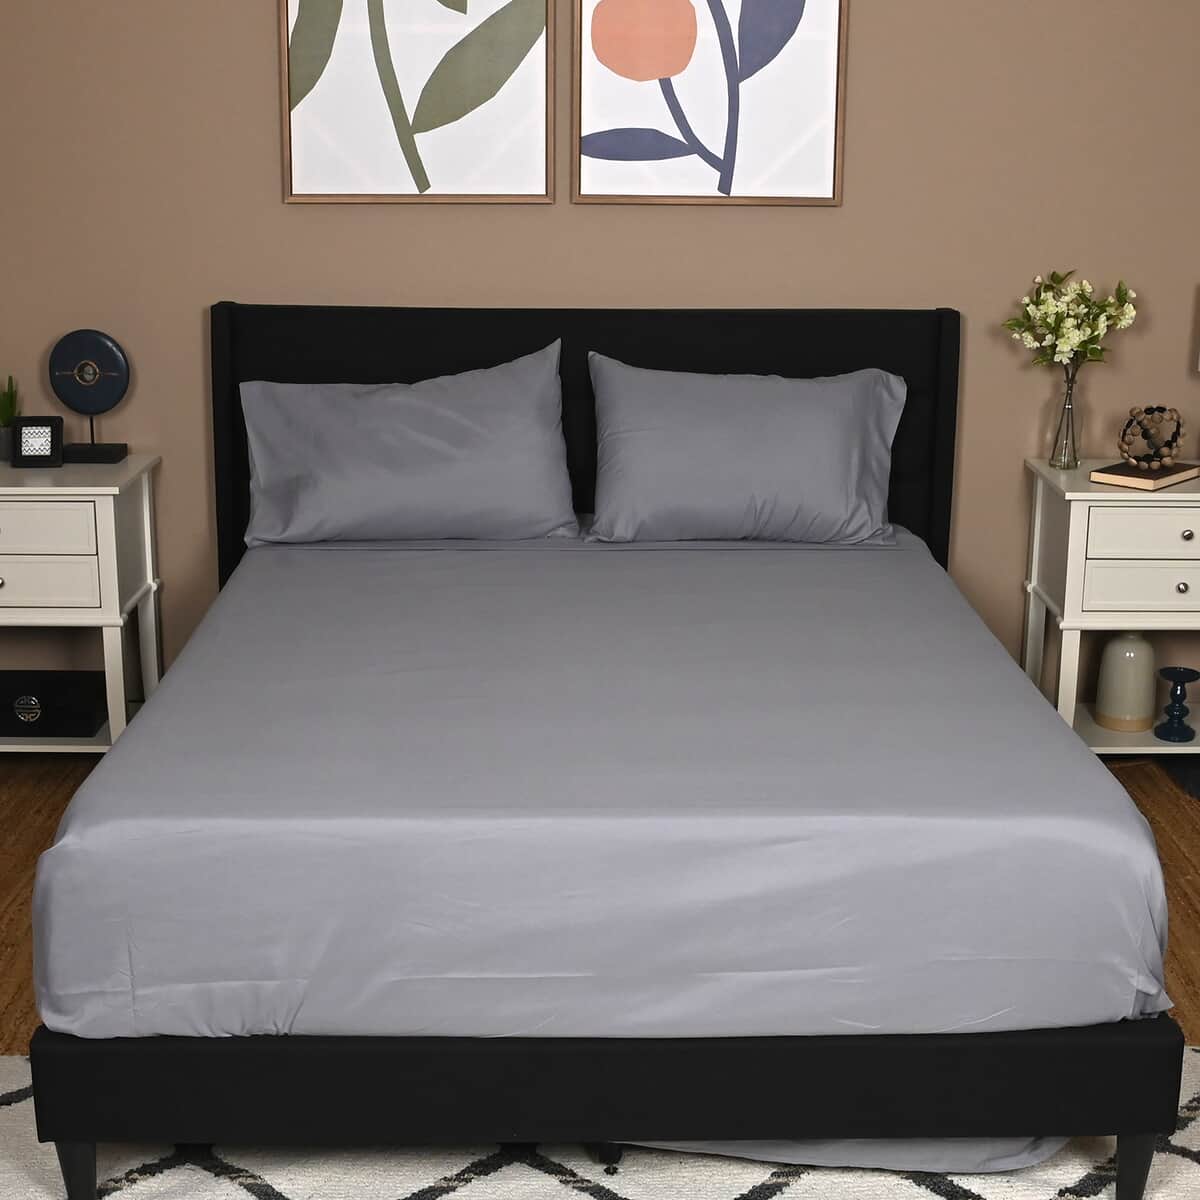 Victory Classic New York Closeout Lincoln Navy, Gray Reversible 5pc Bed in a Bag Comforter Set includes Sheet Set - XL Twin image number 2